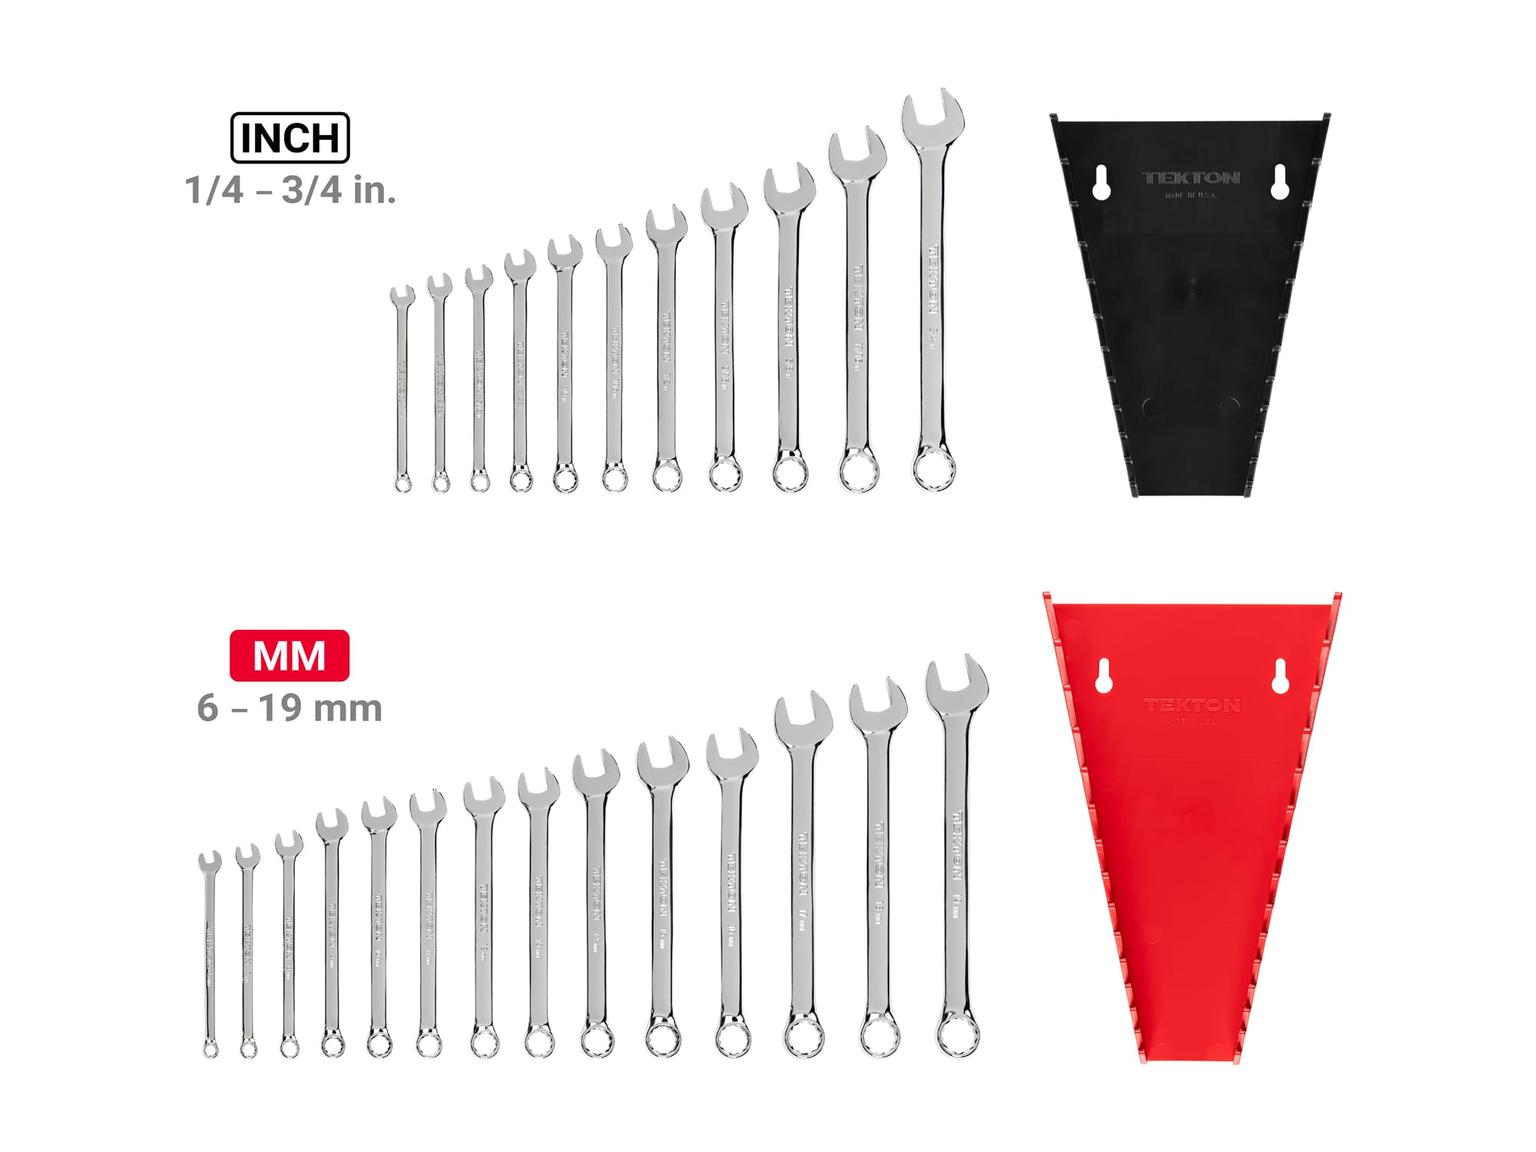 TEKTON WCB91303-T Combination Wrench Set with Rack, 25-Piece (1/4 - 3/4 in., 6 - 19 mm)